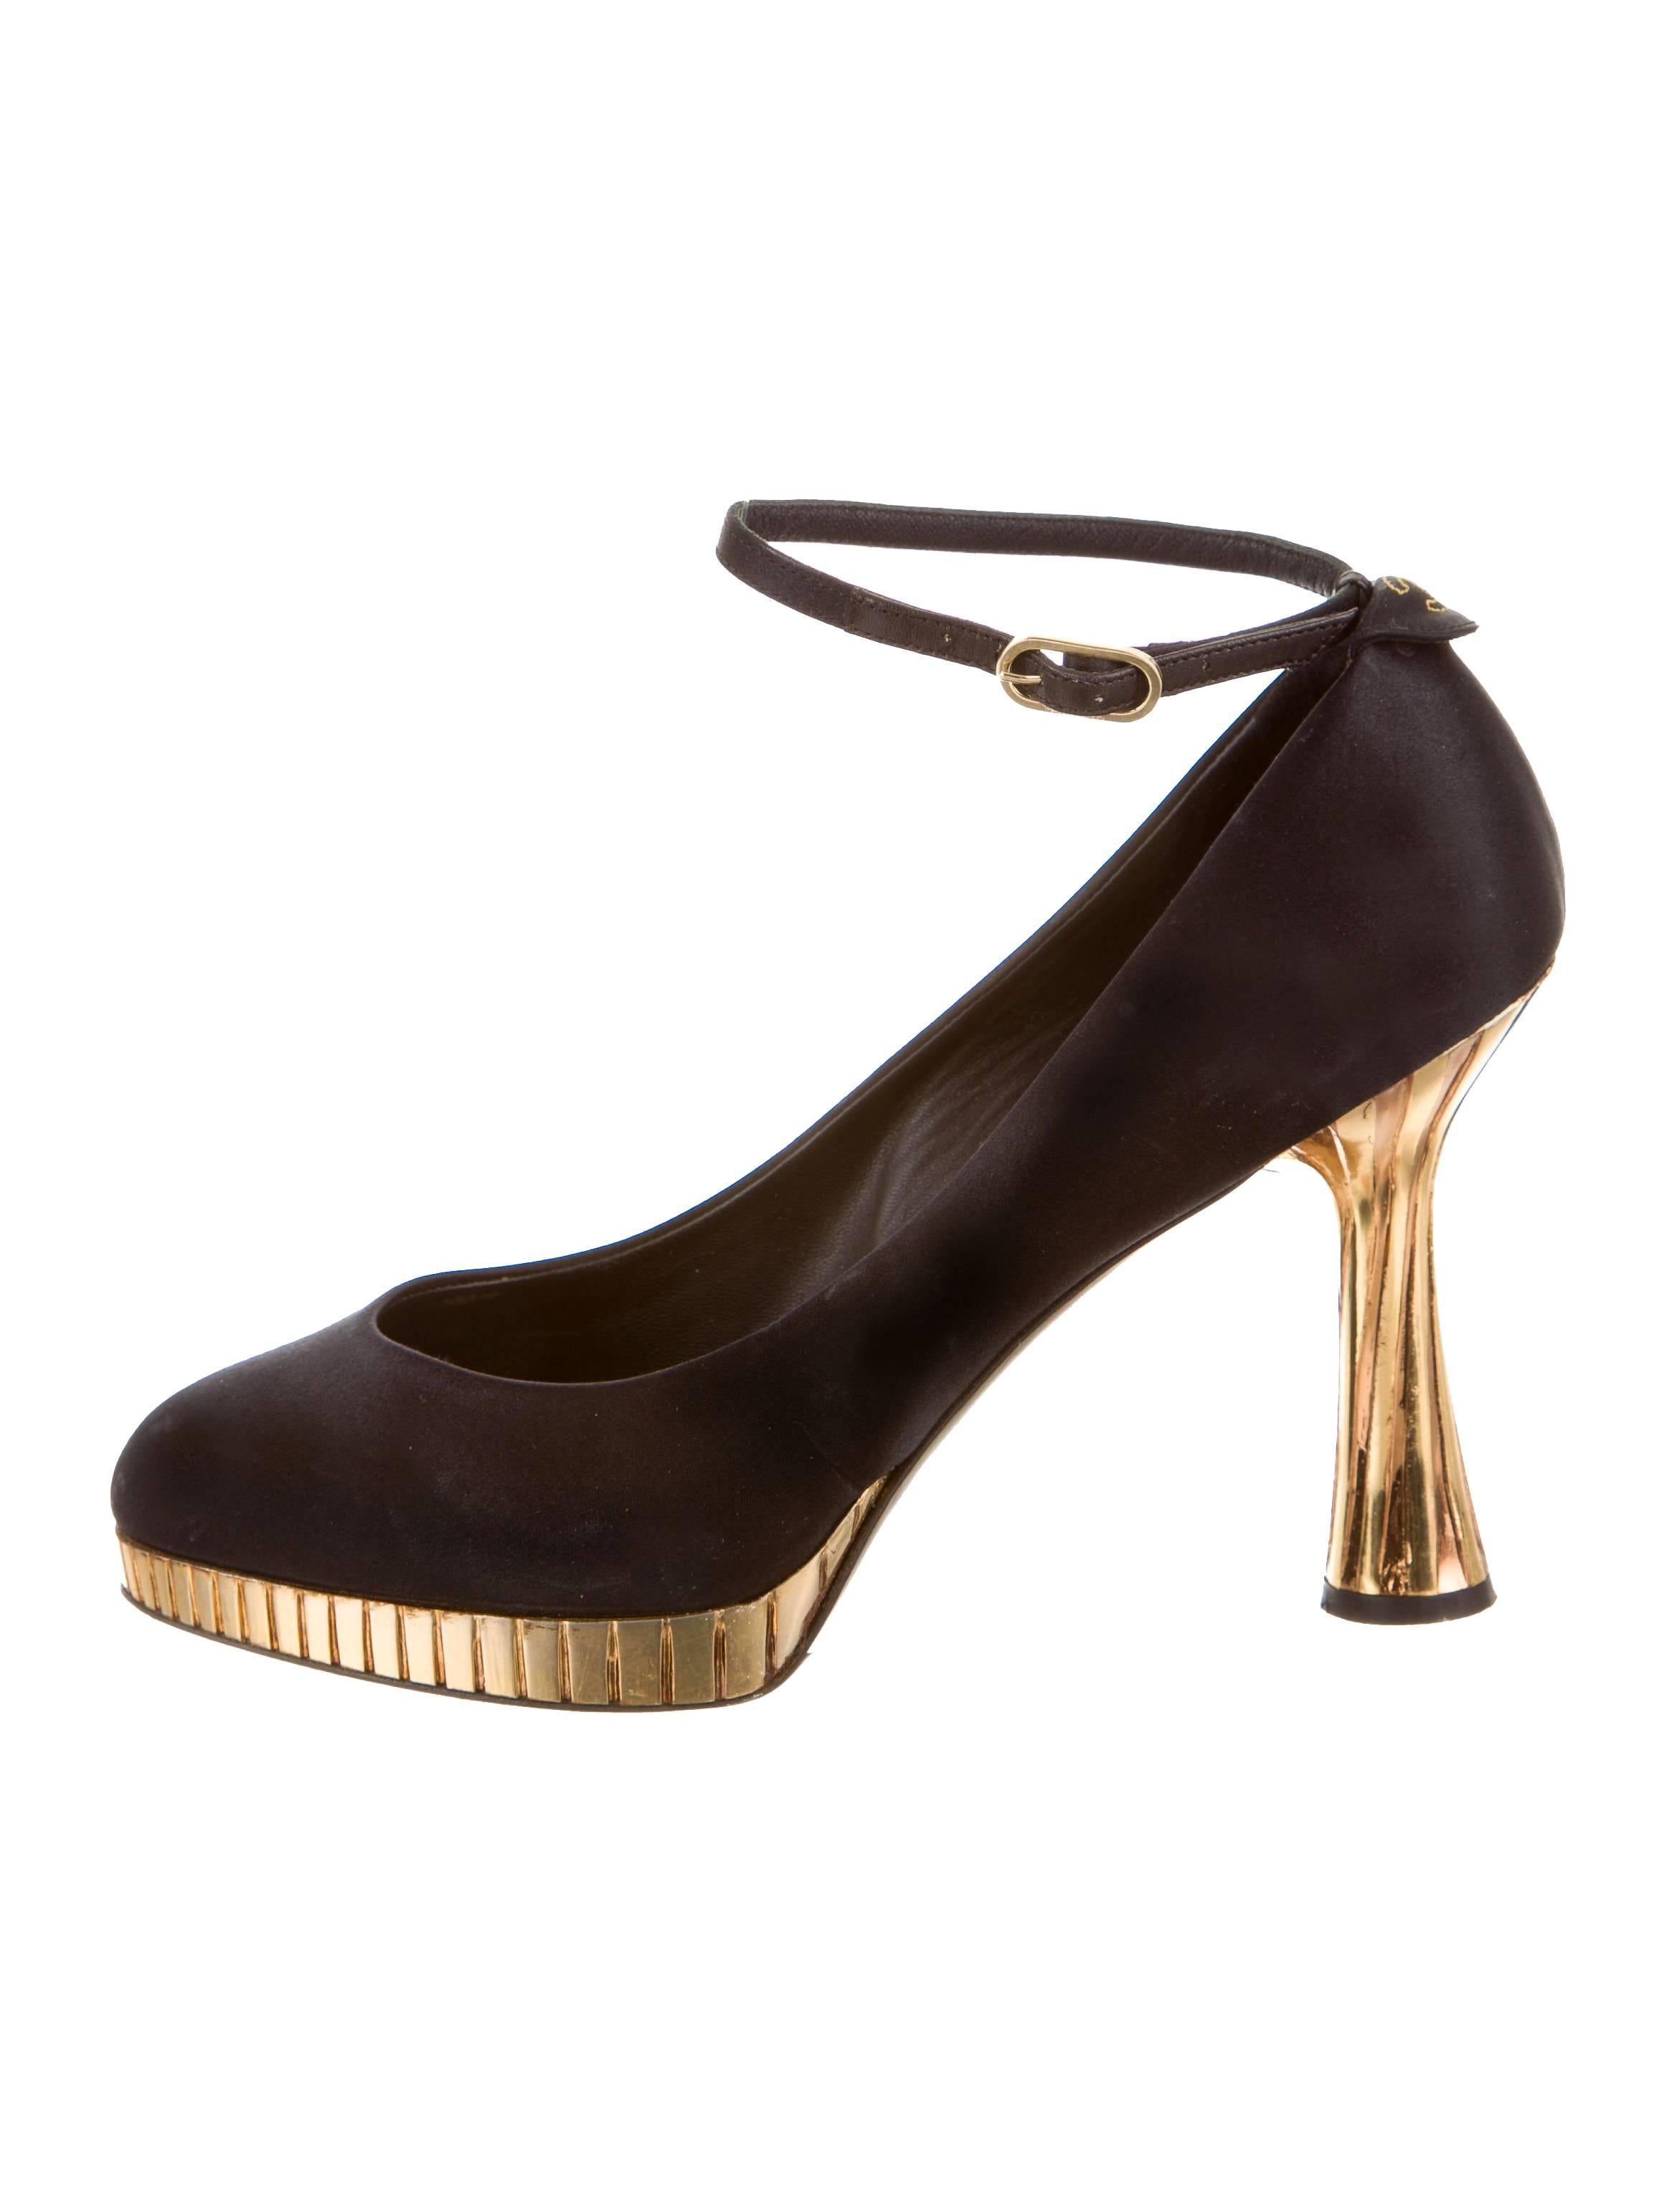 Sample Item. Black satin Chanel platform pumps with round toes, interlocking CC embroidery accents at counters, metallic sculptured heels and gold-tone buckle closures at ankle straps.

Measurements: Heels 4.25